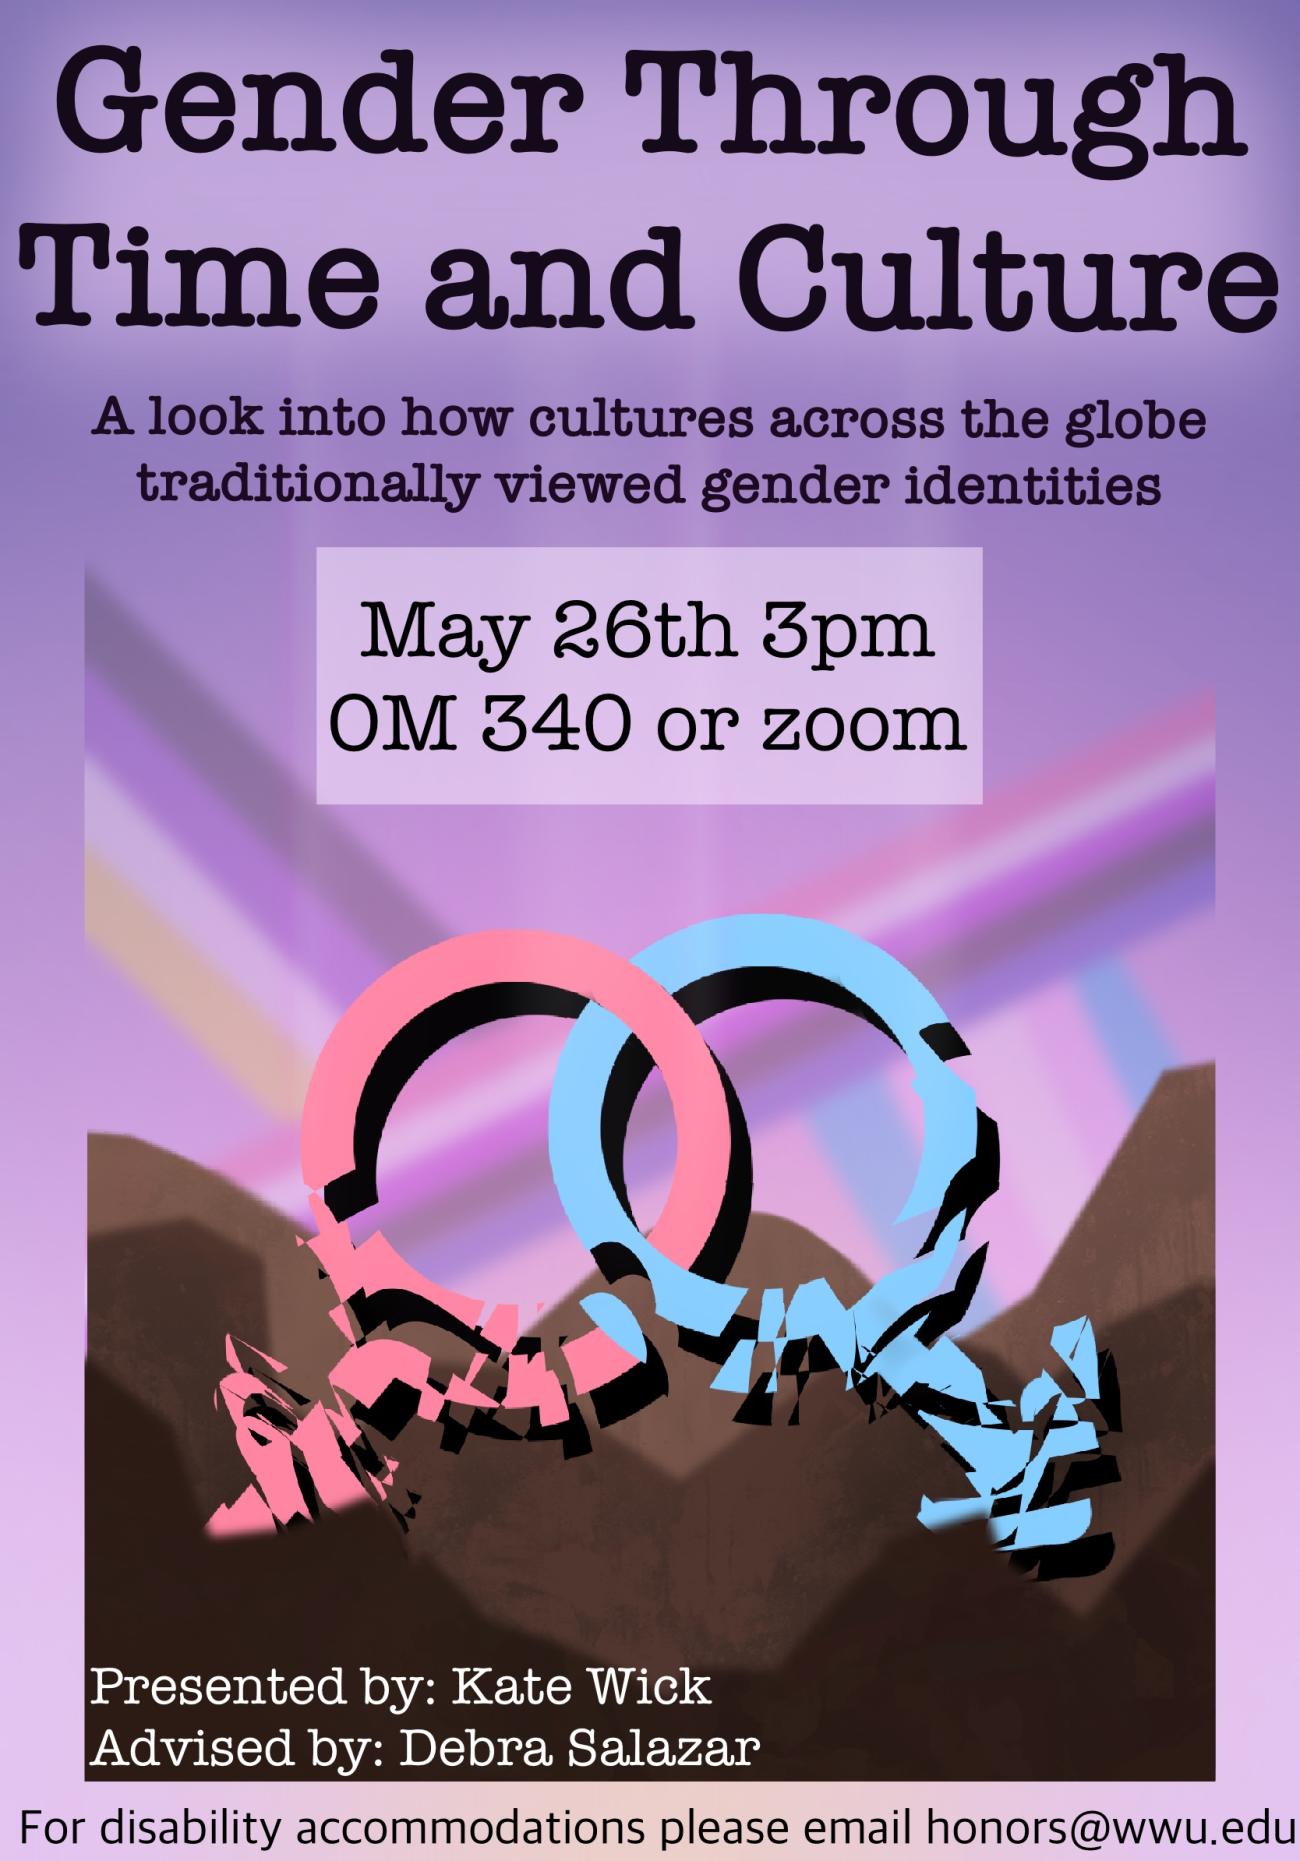 A purple poster with trans, nonbinary, and gender fluid pride flags and the disrupted symbols for male and female. Text reads: "Gender Through Time and Culture: A look into how cultures across the globe traditionally viewed gender identities. May 26th 3pm OM340 or zoom. Presented by Kate wick. Advised by Debra Salazar. For disability accommodations, please email honors@wwu.edu."